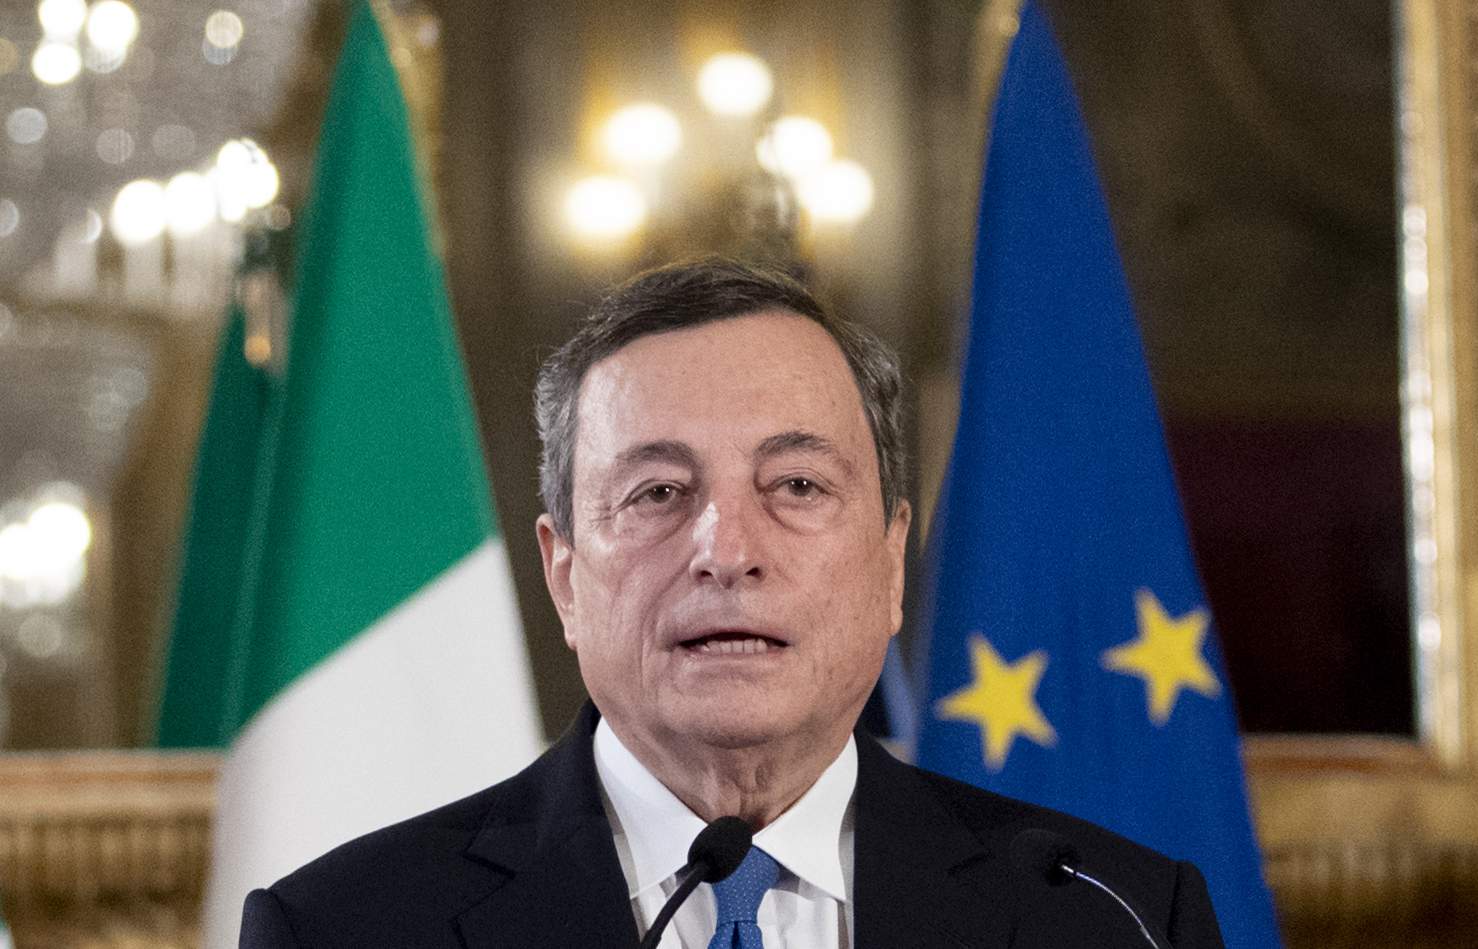 Italy looks to 'Super Mario' Draghi to end political crisis